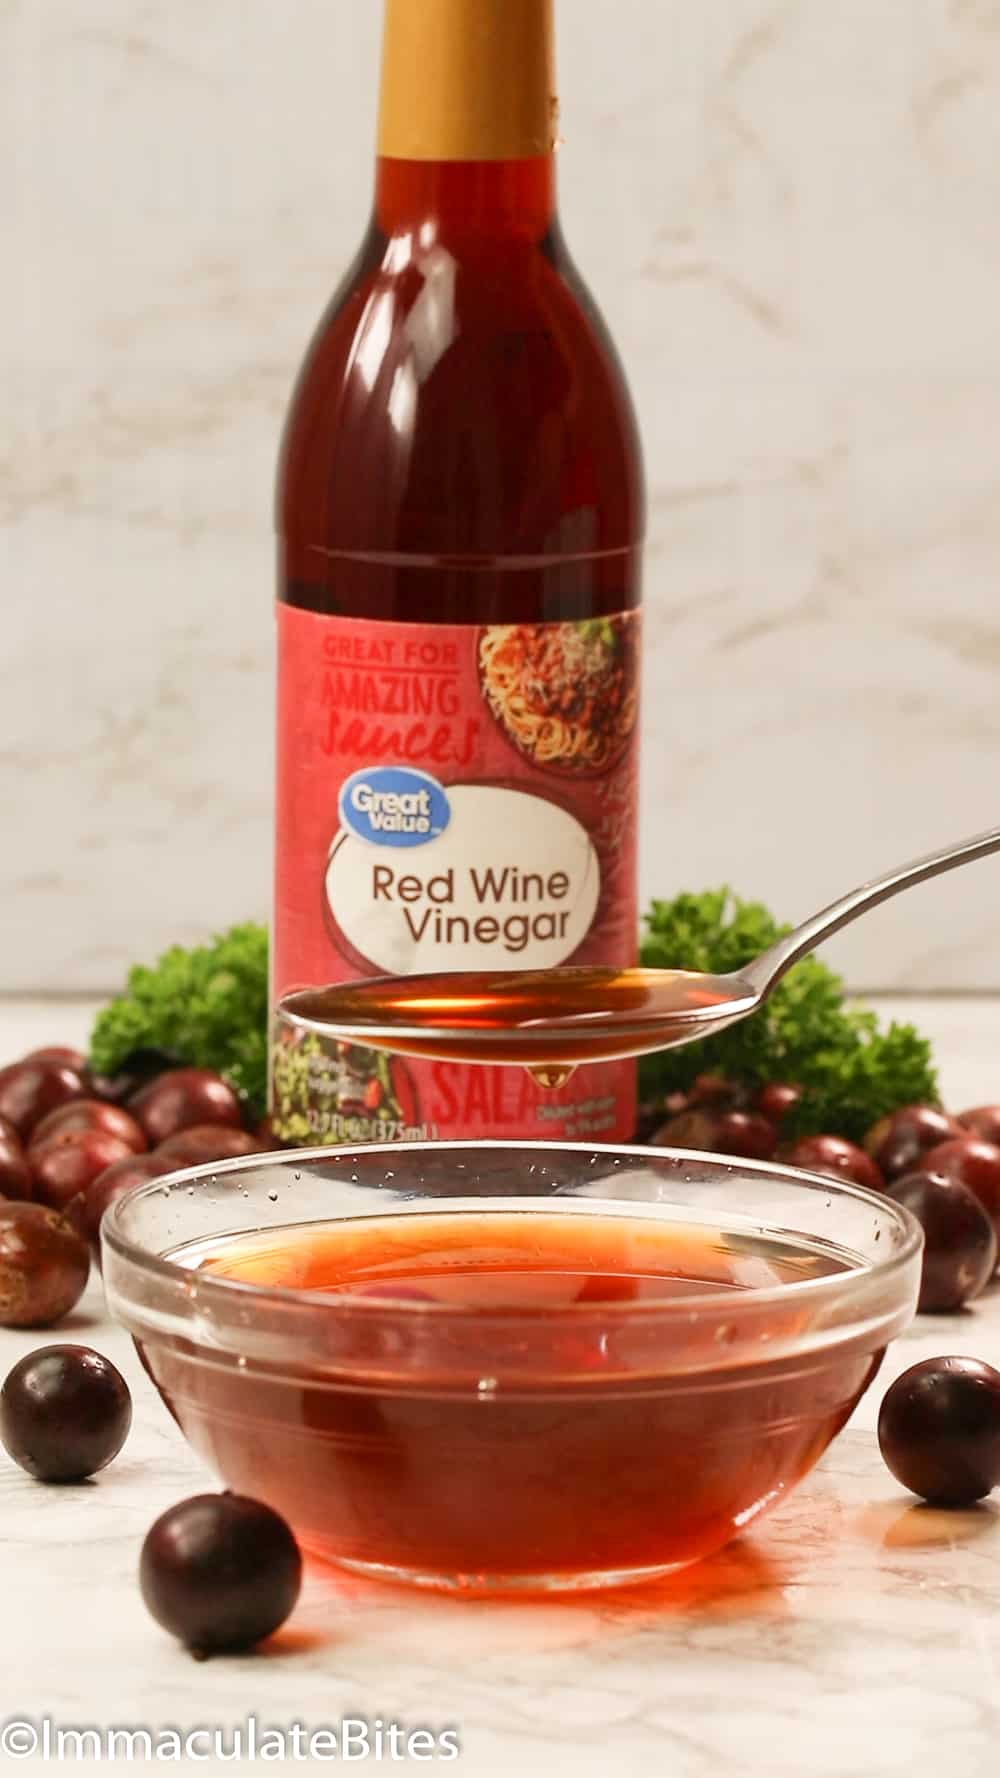 A bottle of red wine vinegar with some in a bowl ready to make a marinade.